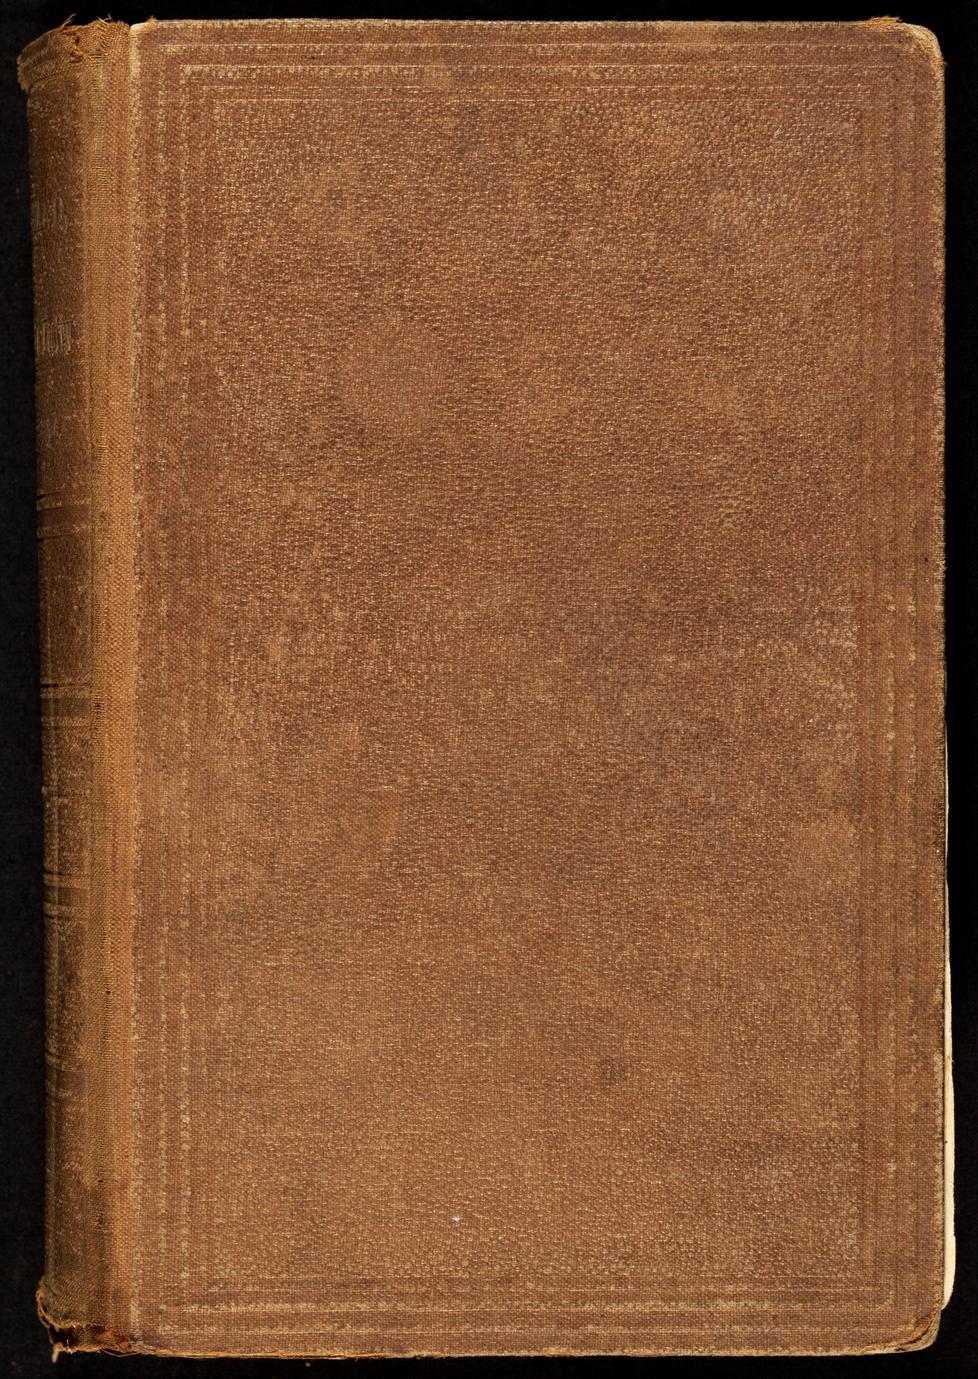 The sunny land ; or, Prison prose and poetry : containing the production of the ablest writers in the South, and prison lays of distinguished Confederate officers (1 of 2)